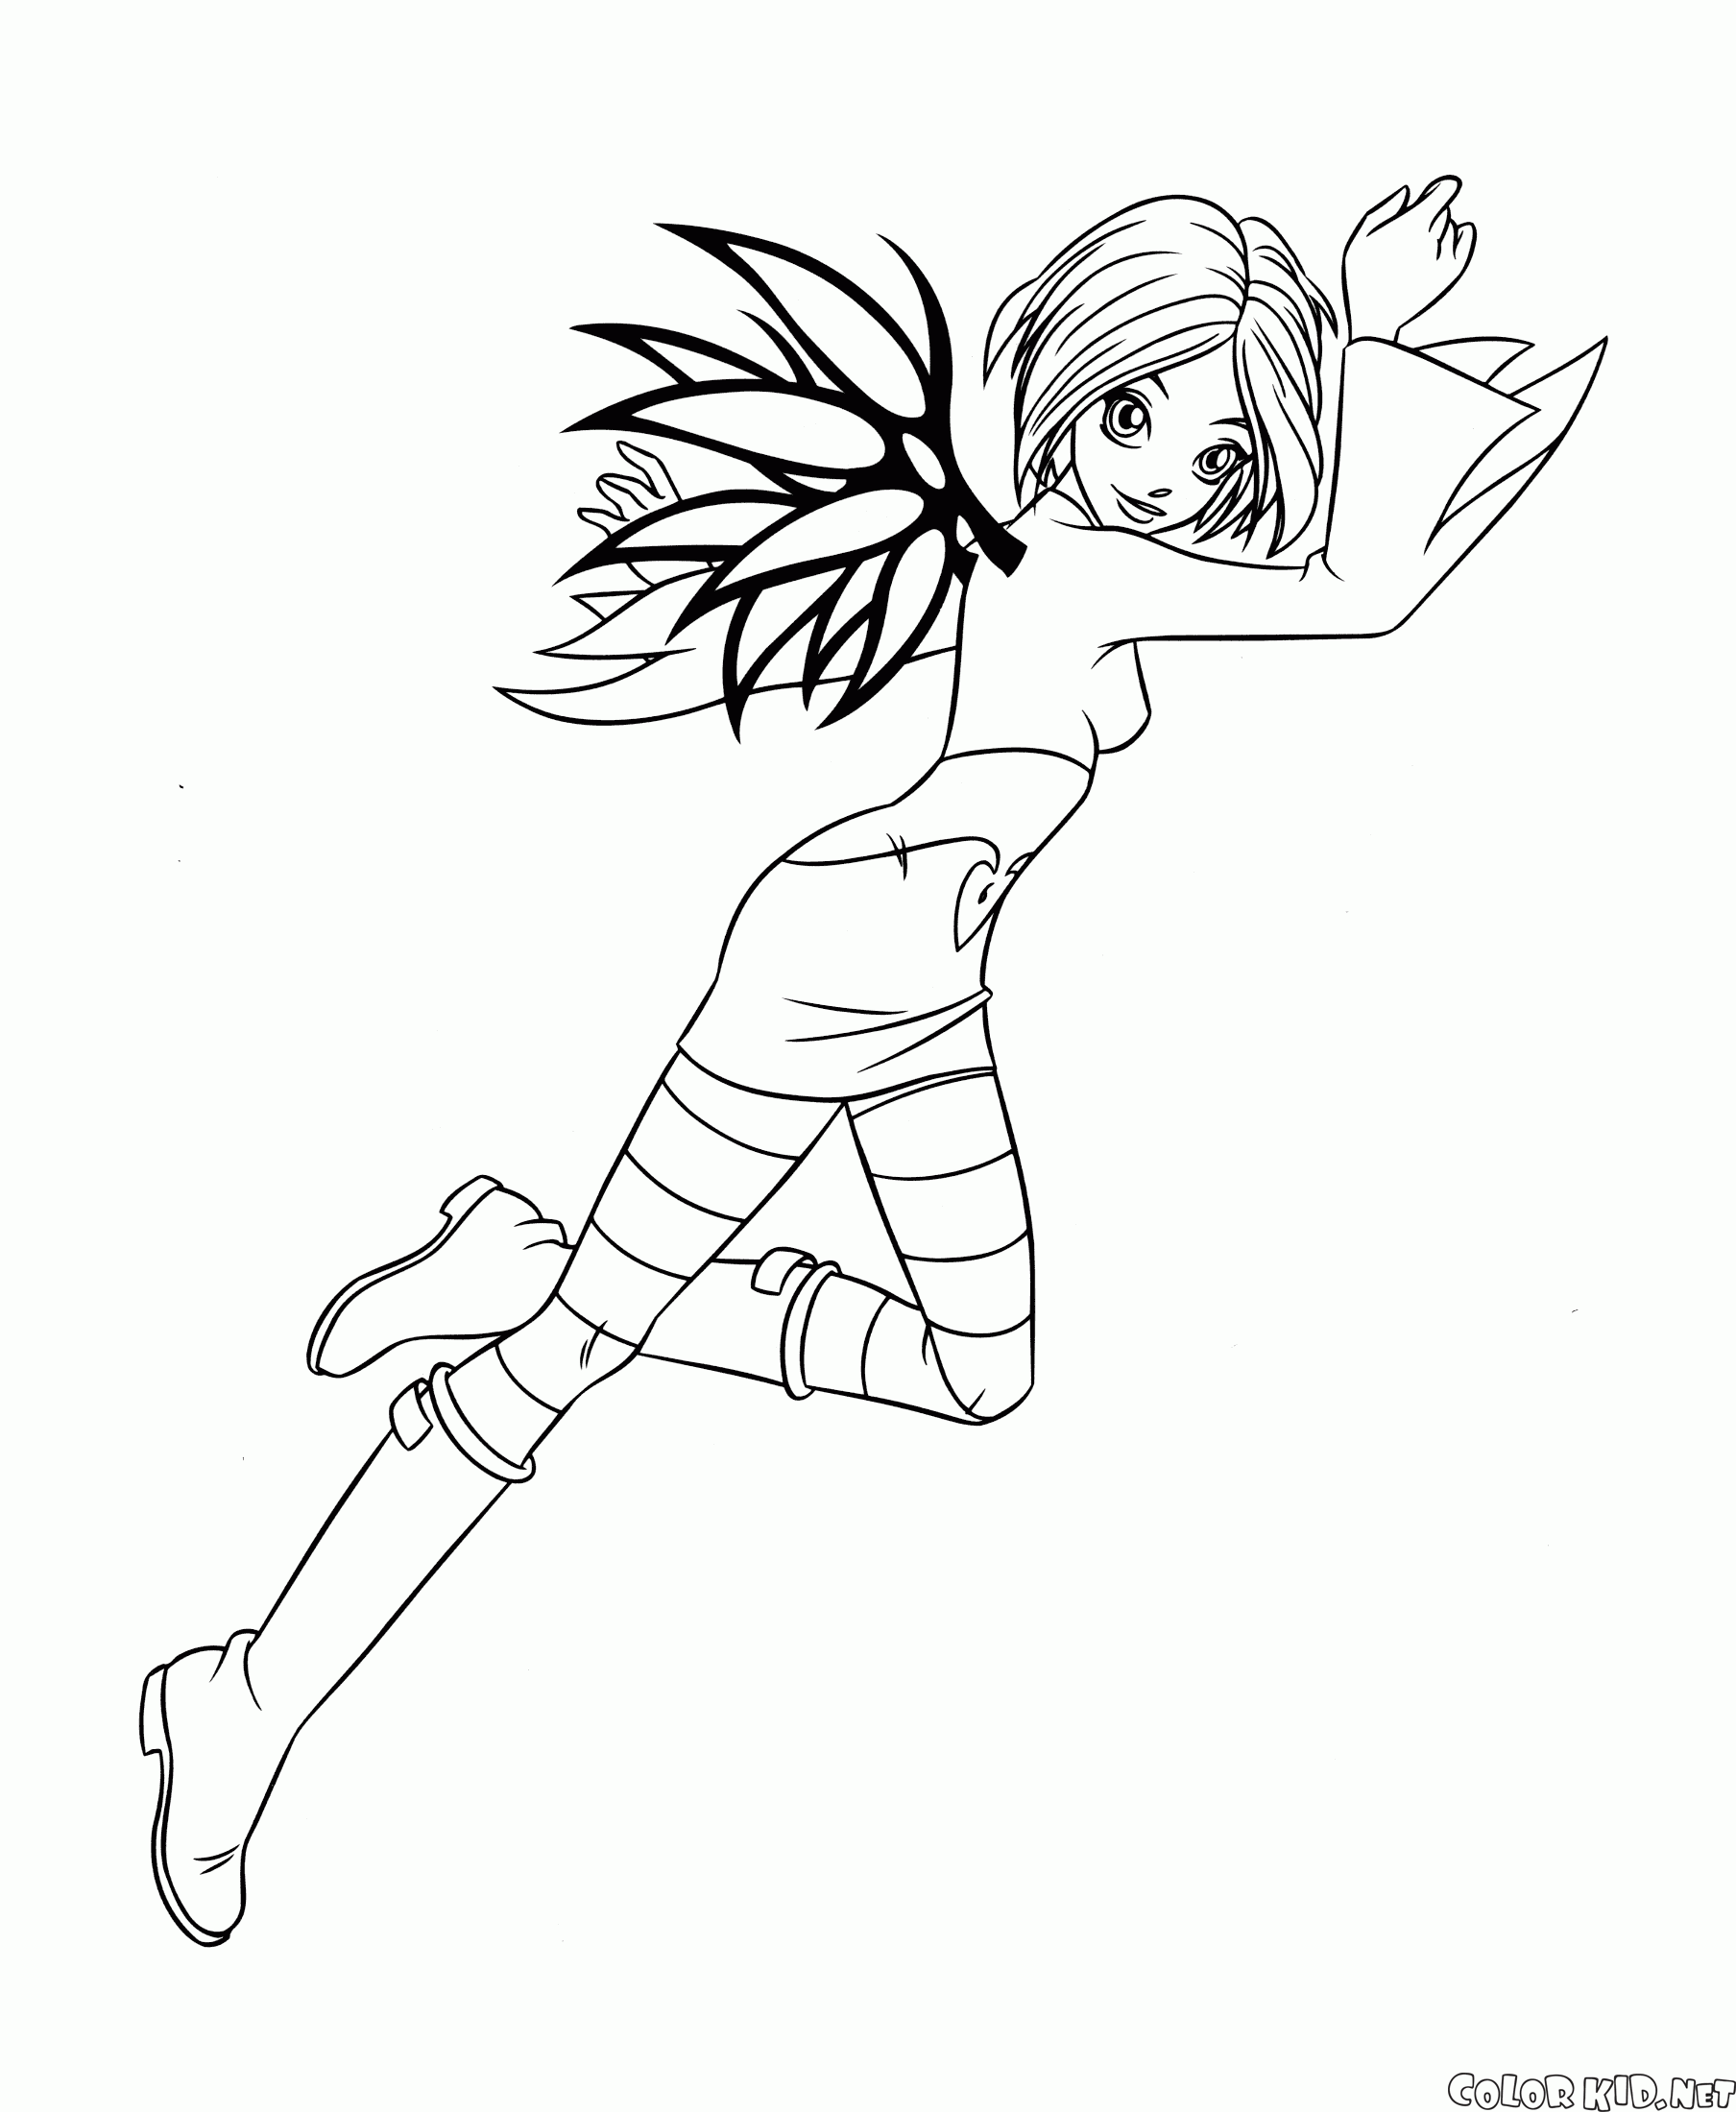 Coloring page - WITCH